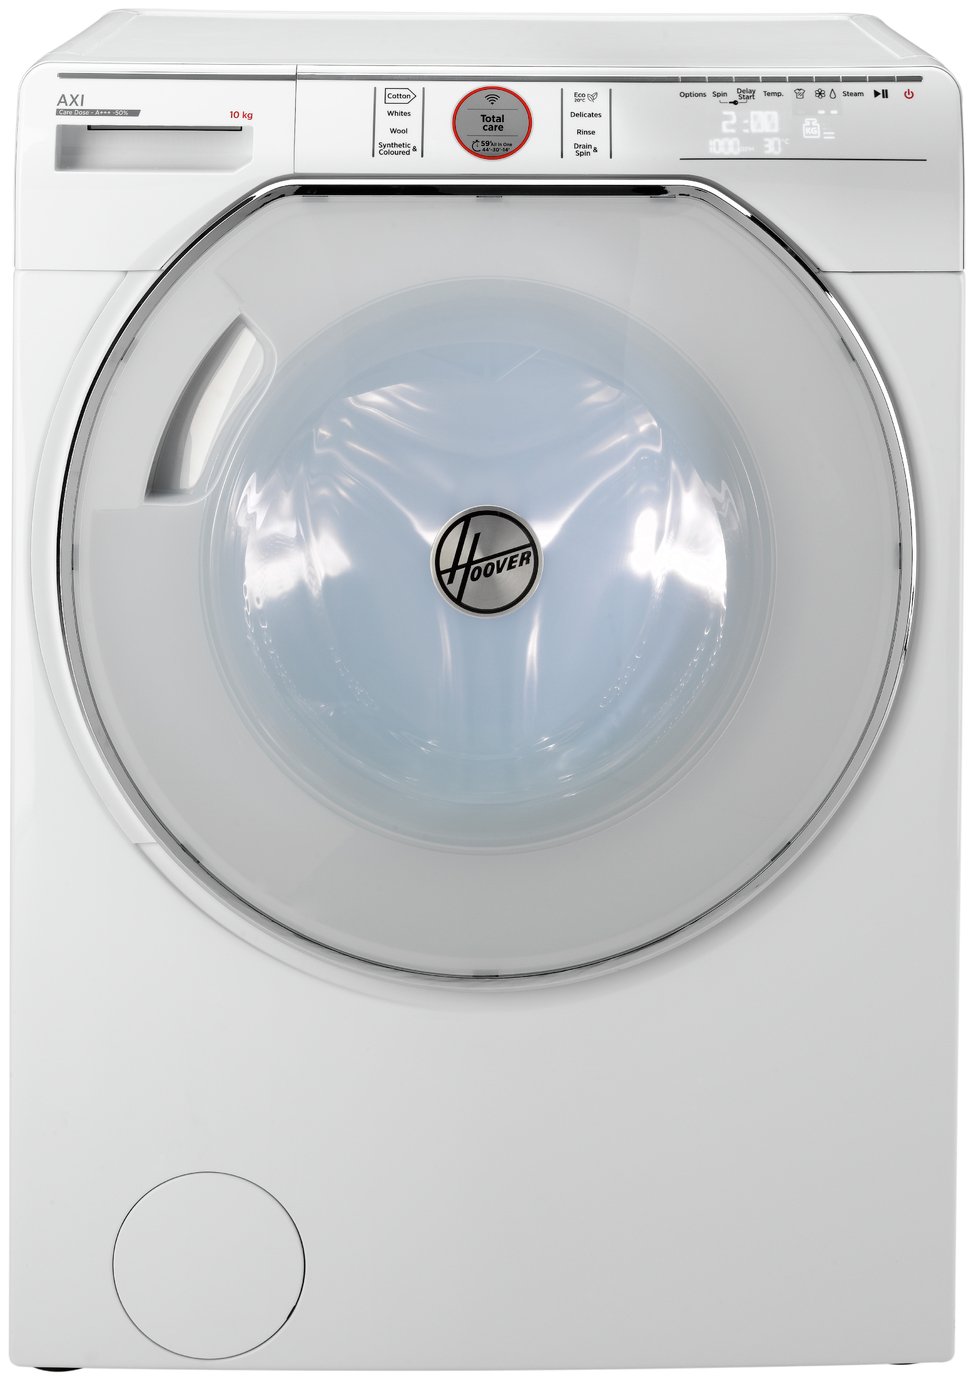 Hoover AXI AWMPD69LHO7 9KG 1600 Spin Washing Machine review